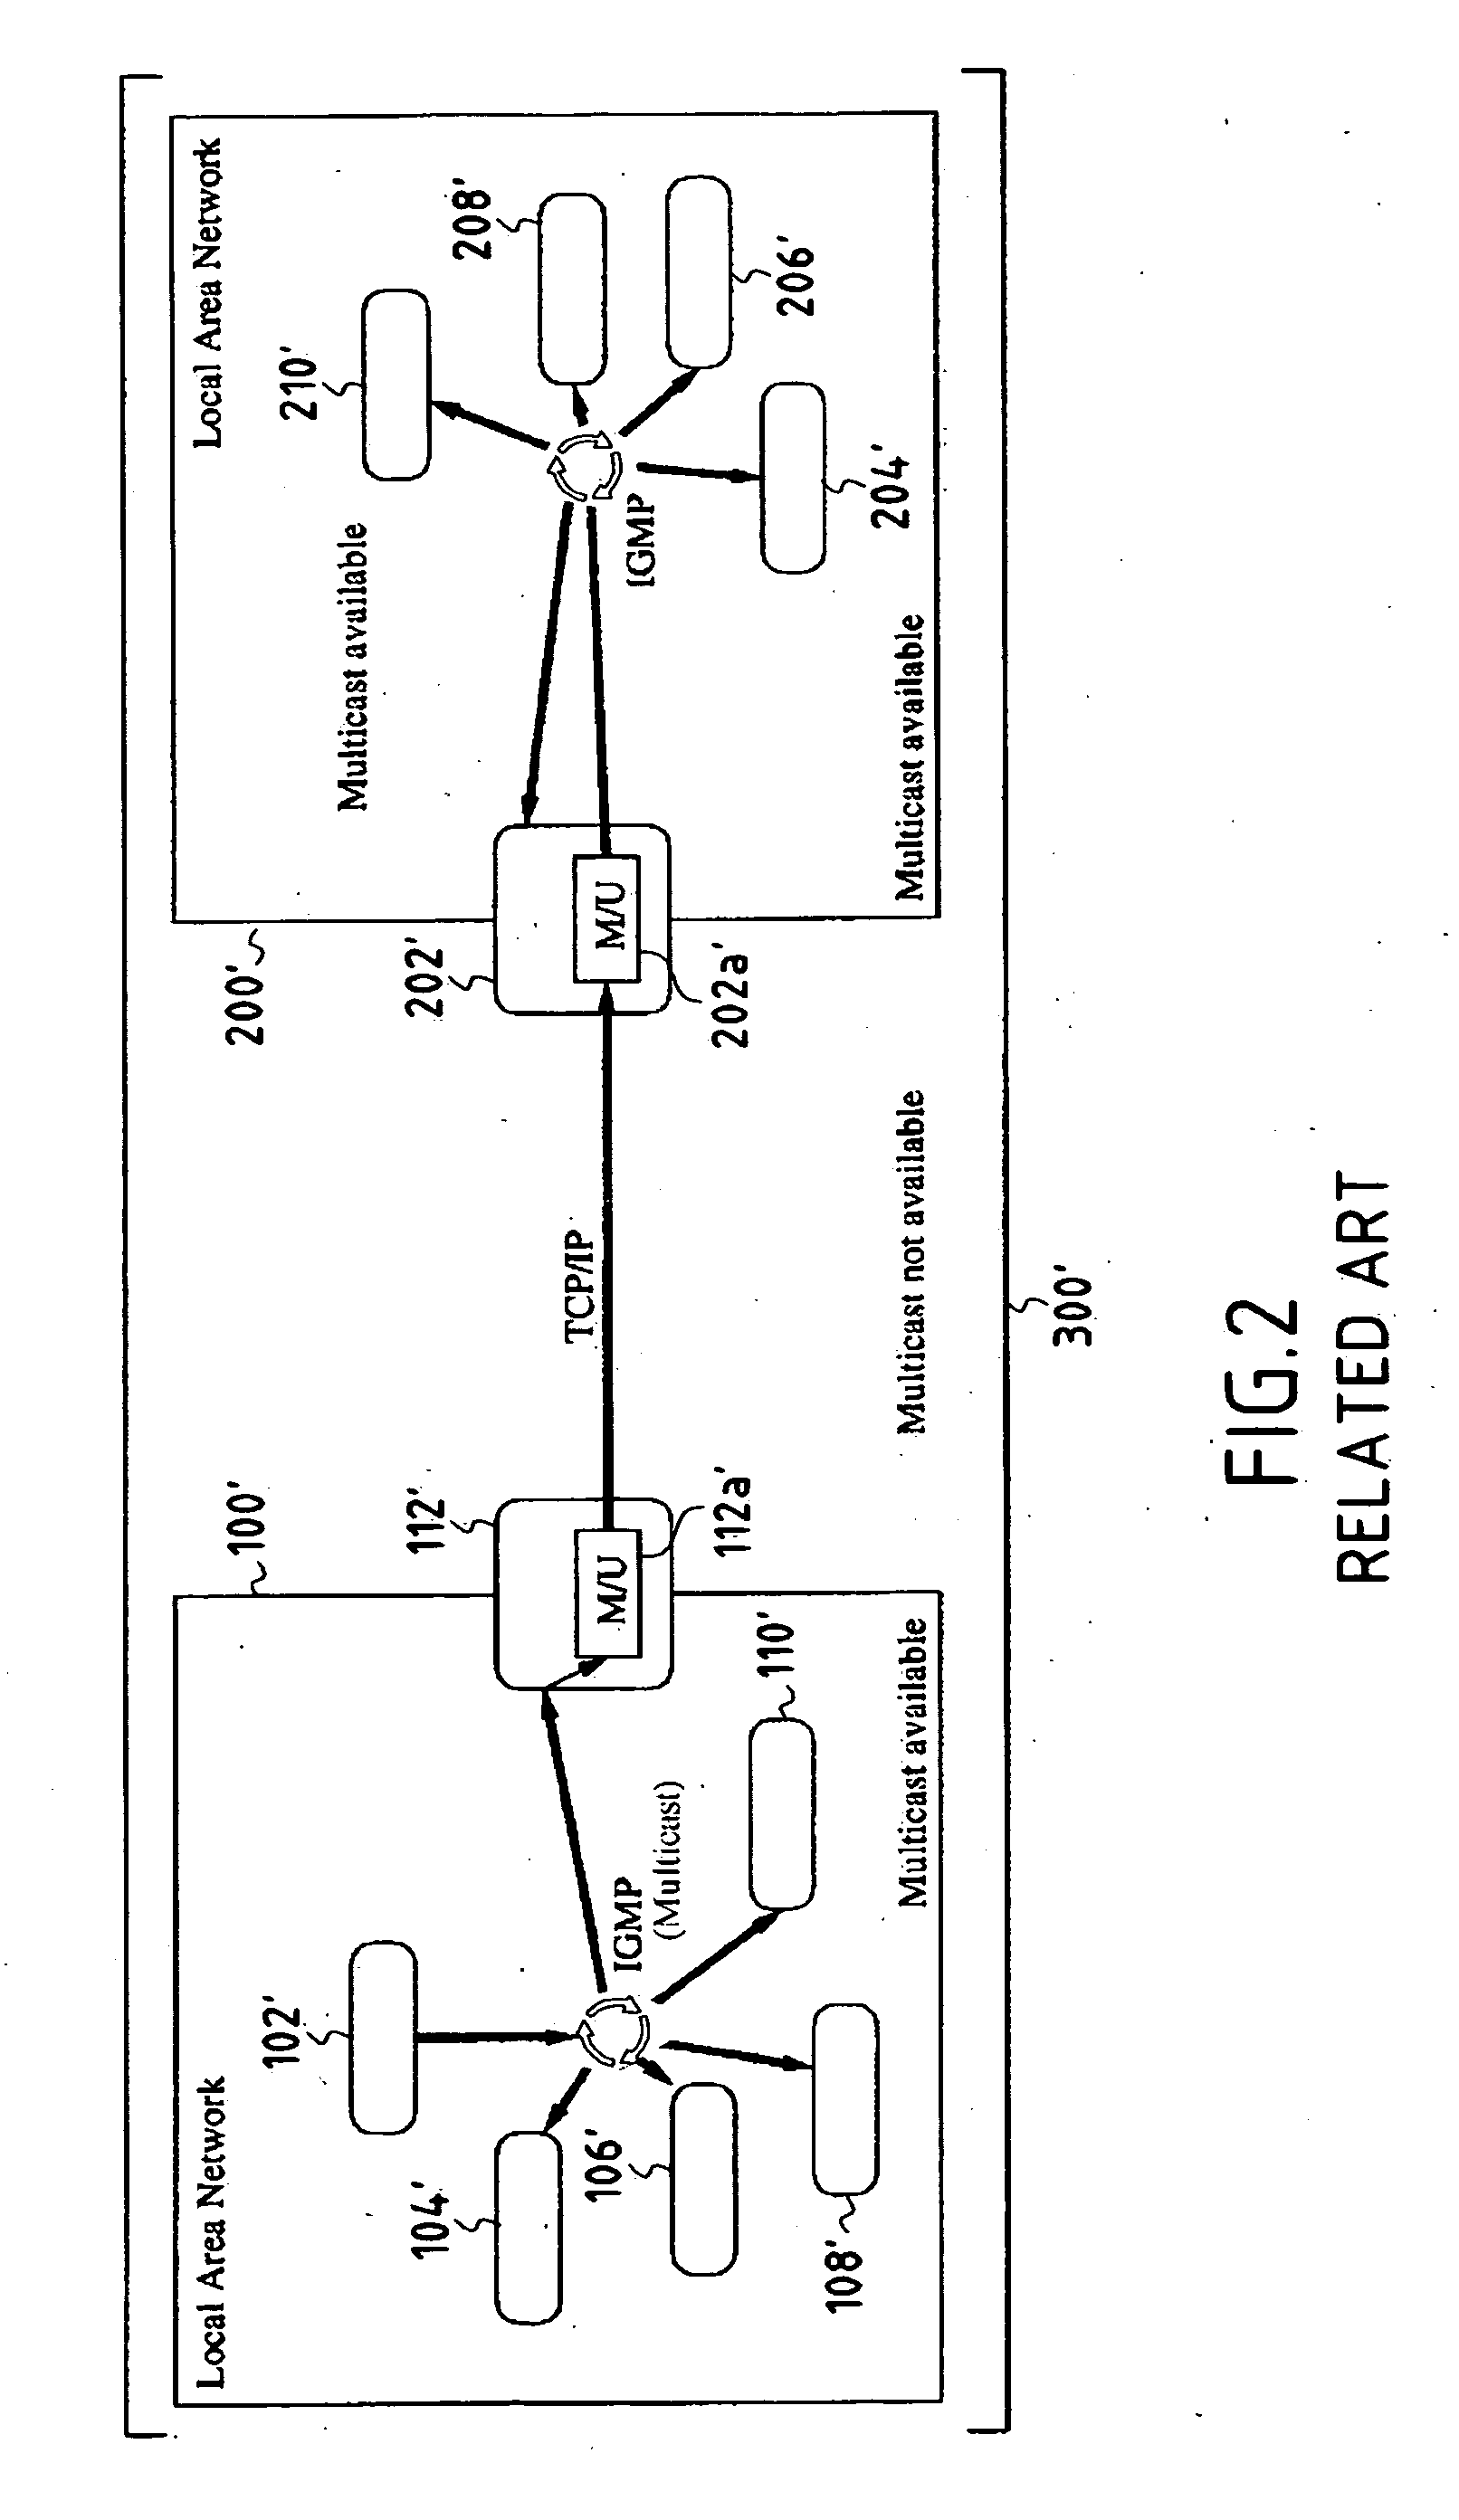 Method and system for packet data communication between networks